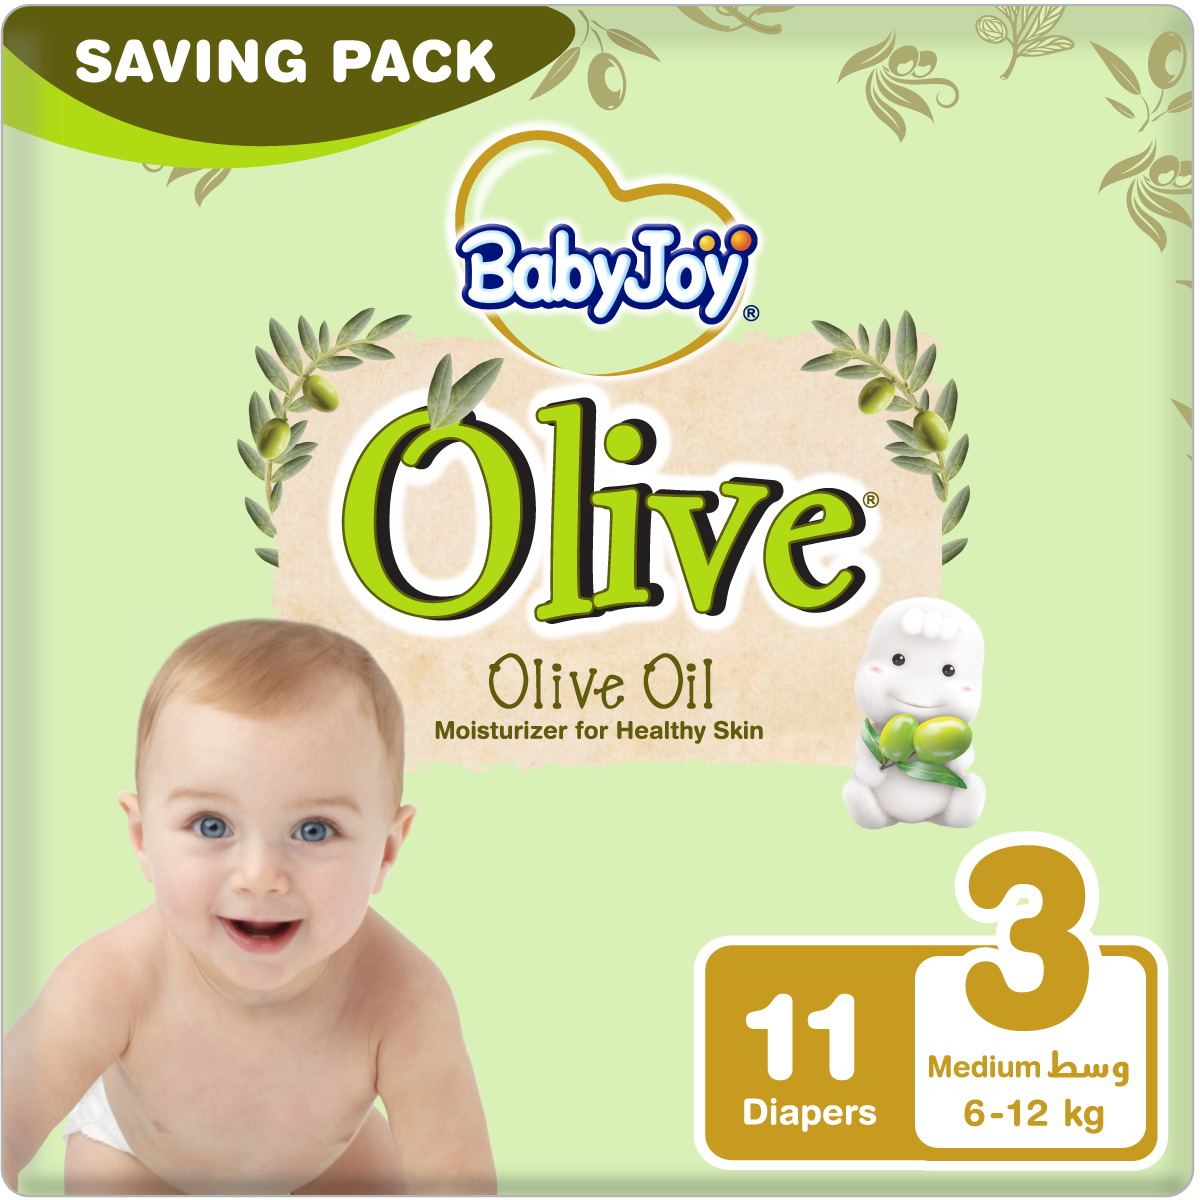 BABYJOY OLIVE Diapers, Size 3 Medium, Saving Pack, 6-12 KG, Count 11